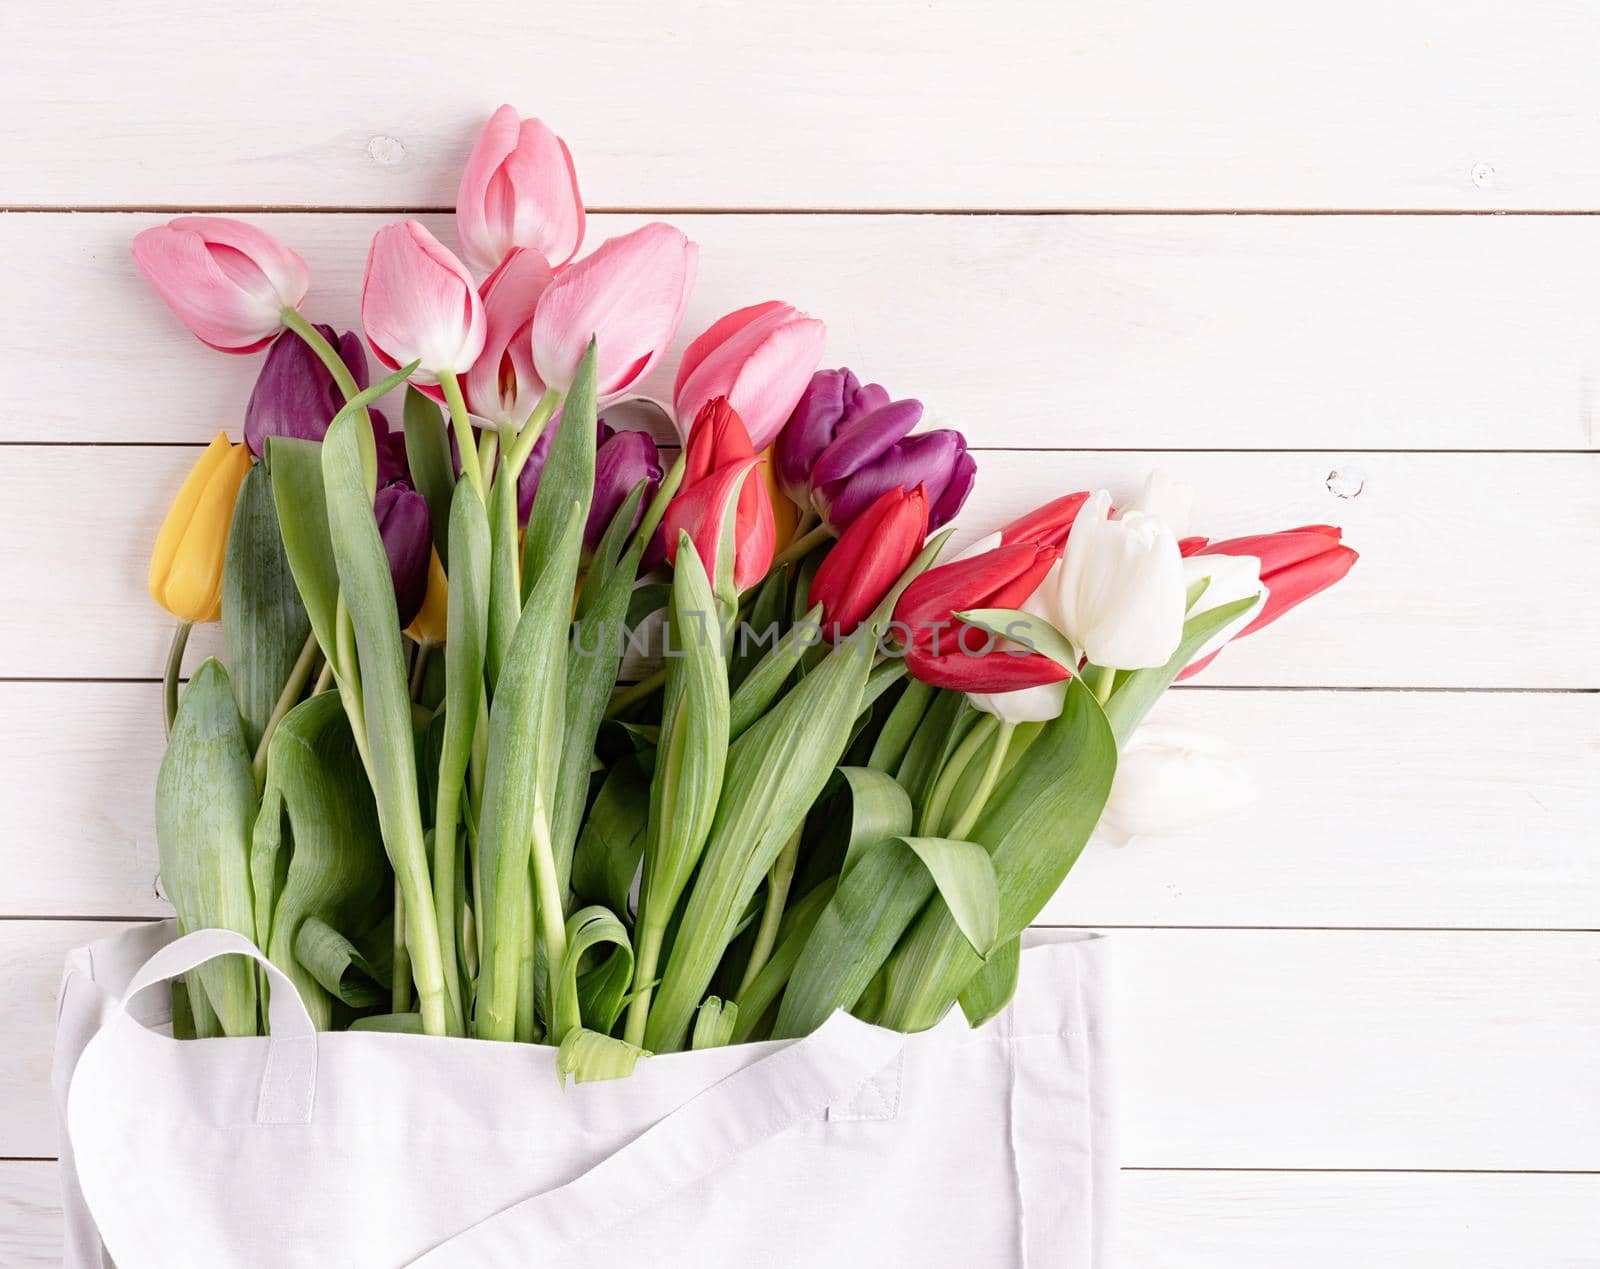 Eco friendly, zero waste concept. Gray fabric bag full of colorful tulips on white wooden background